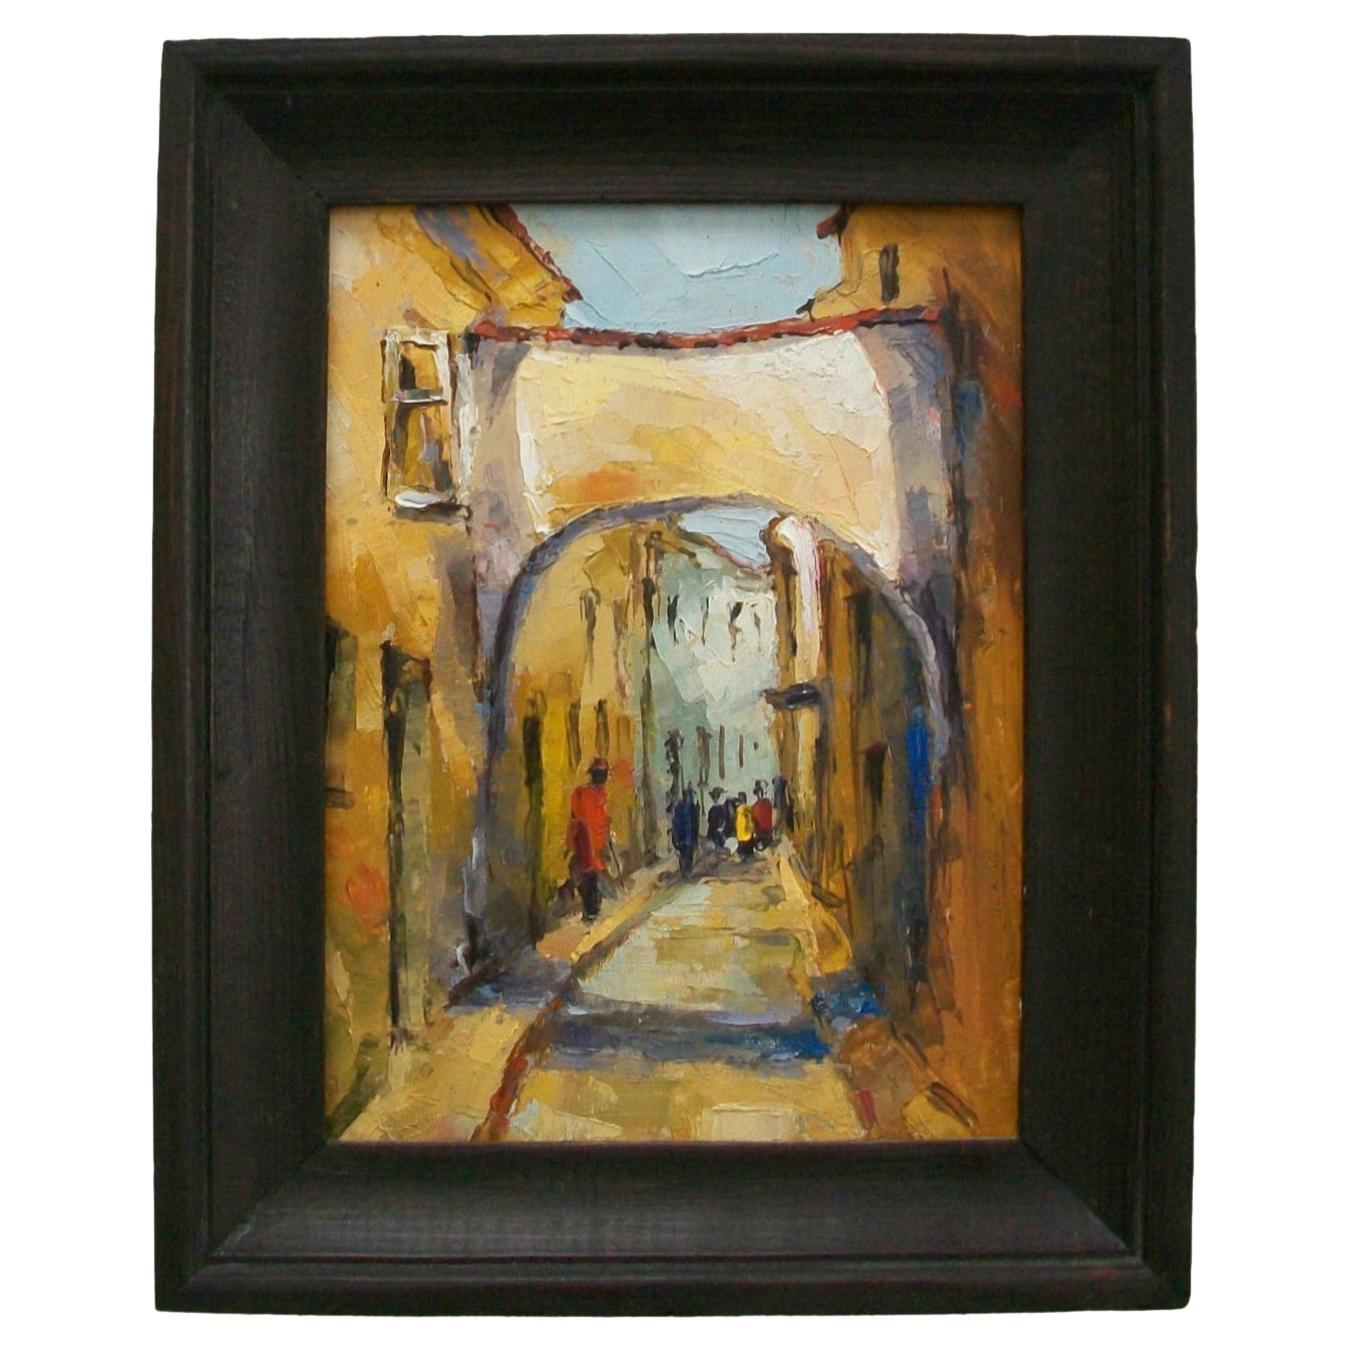 Post Impressionist Style Acrylic Painting on Panel - Framed - Late 20th Century